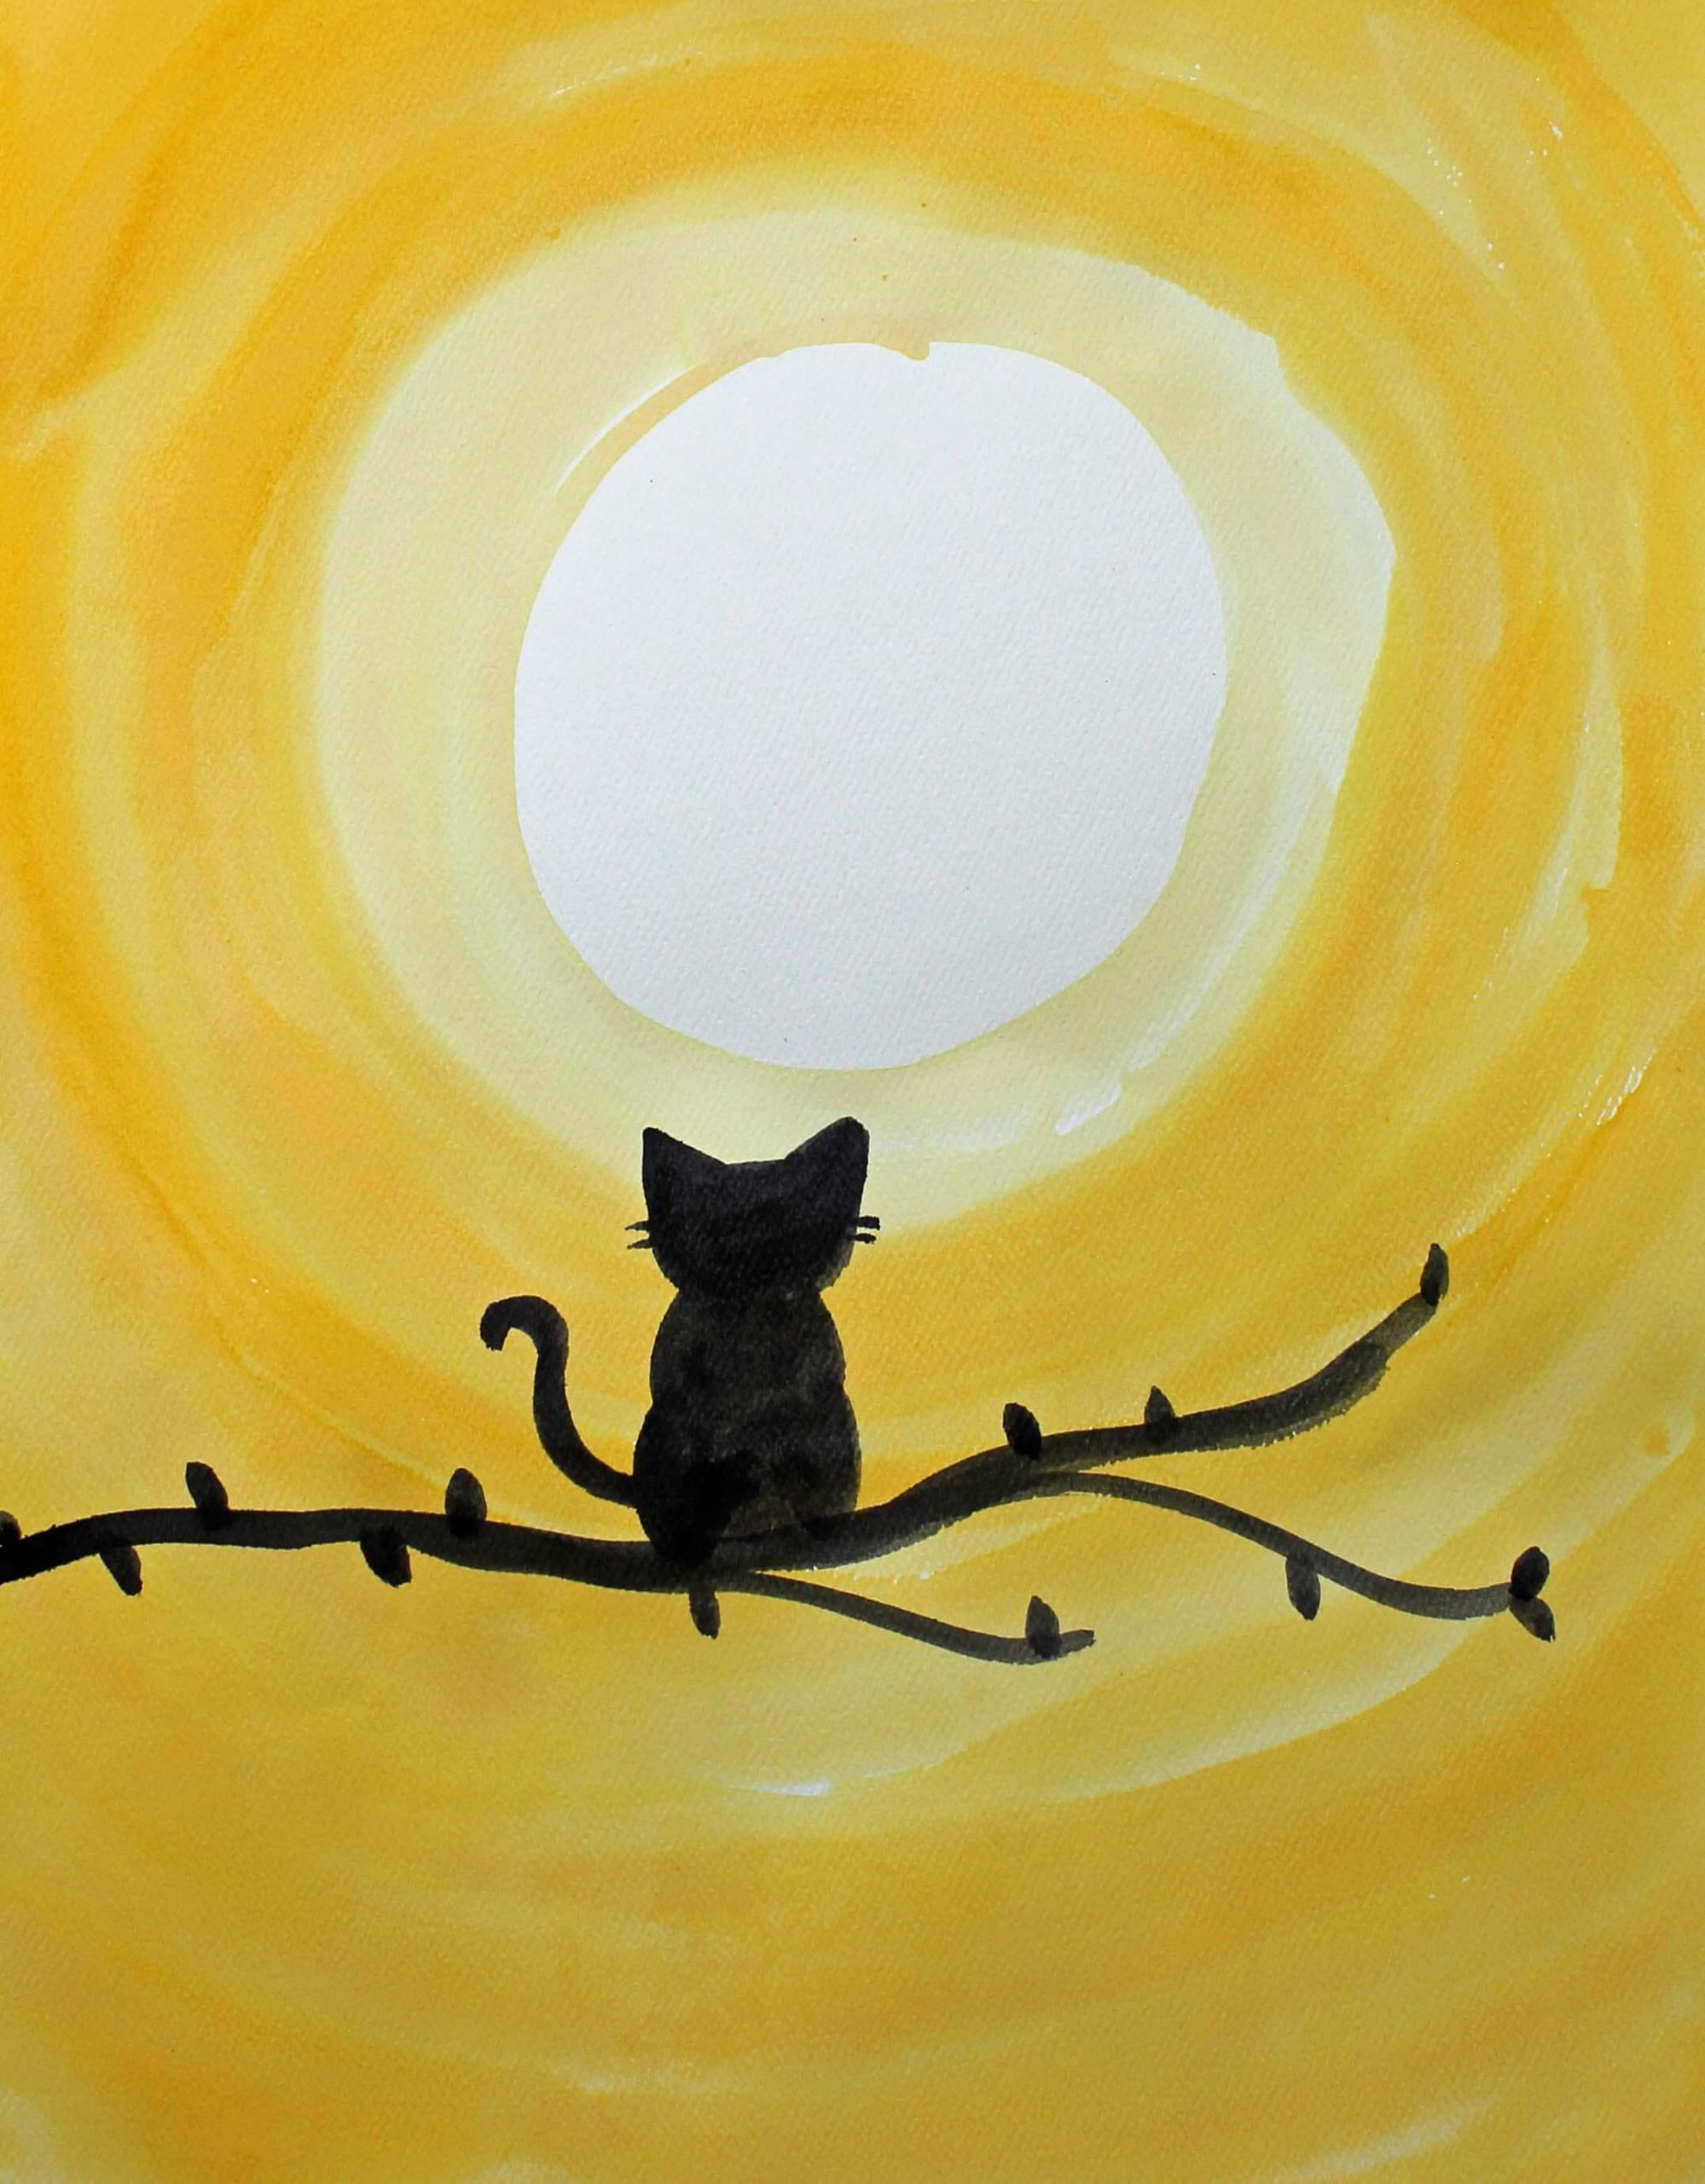 Handmade Adorable Cat & Sunset Painting For KidsSilhouette painting with watercolors